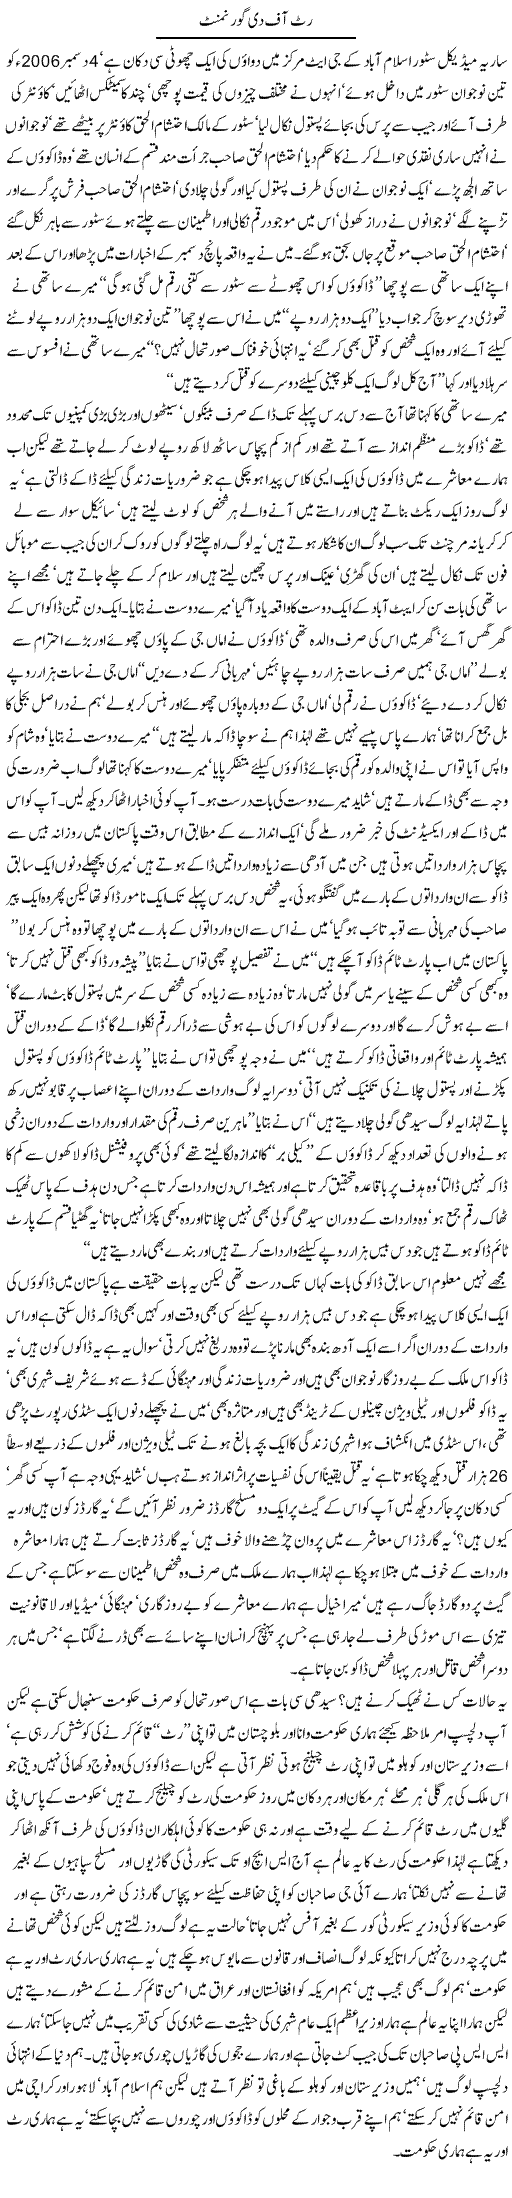 writ of the government by Javed chaudhry